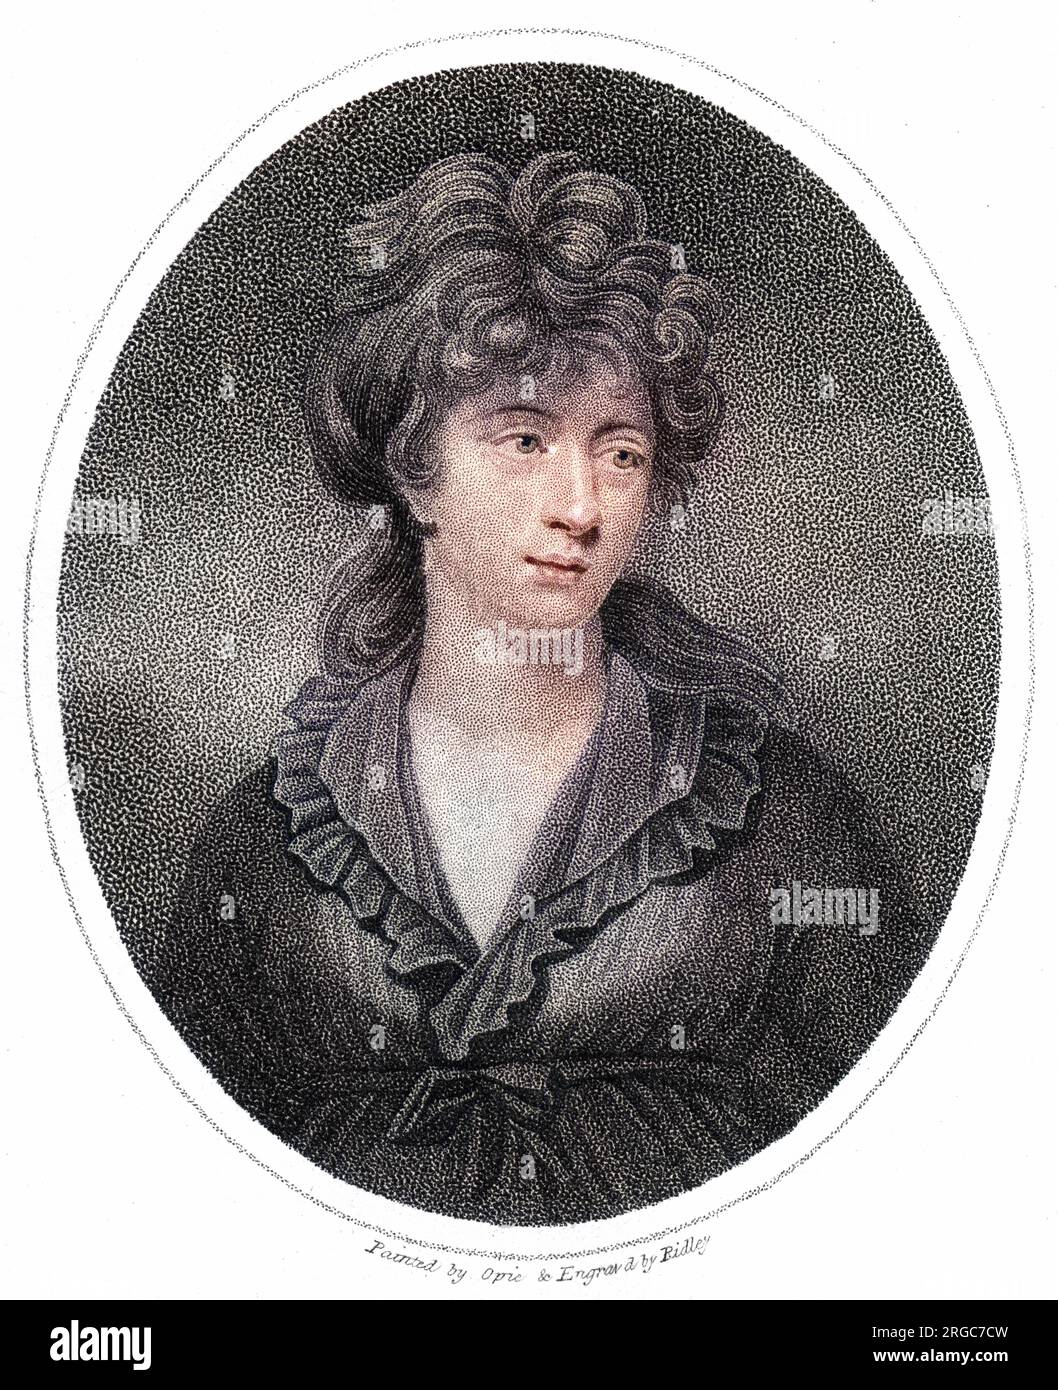 AMELIA OPIE (nee Alderson) Popular author of The Black Man's Lament or How to make Sugar, and Illustrations of Lying in all its Branches. Quaker, wife of John Opie. Stock Photo